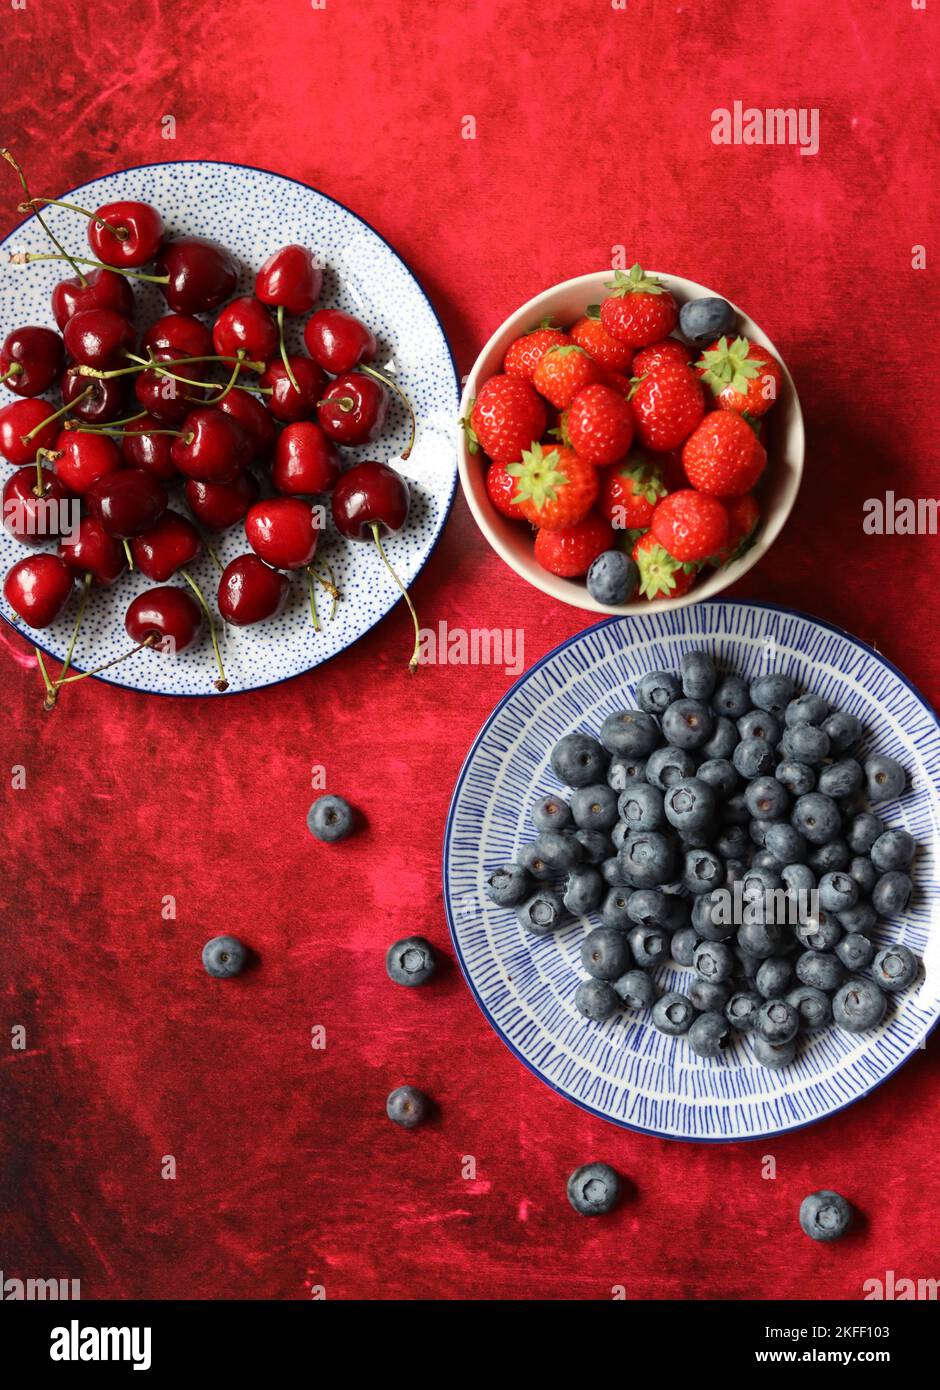 Summer still life with fresh berries on ceramic plates. Top view photo of organic cherry, blueberry and strawberry. Healthy eating concept. Stock Photo